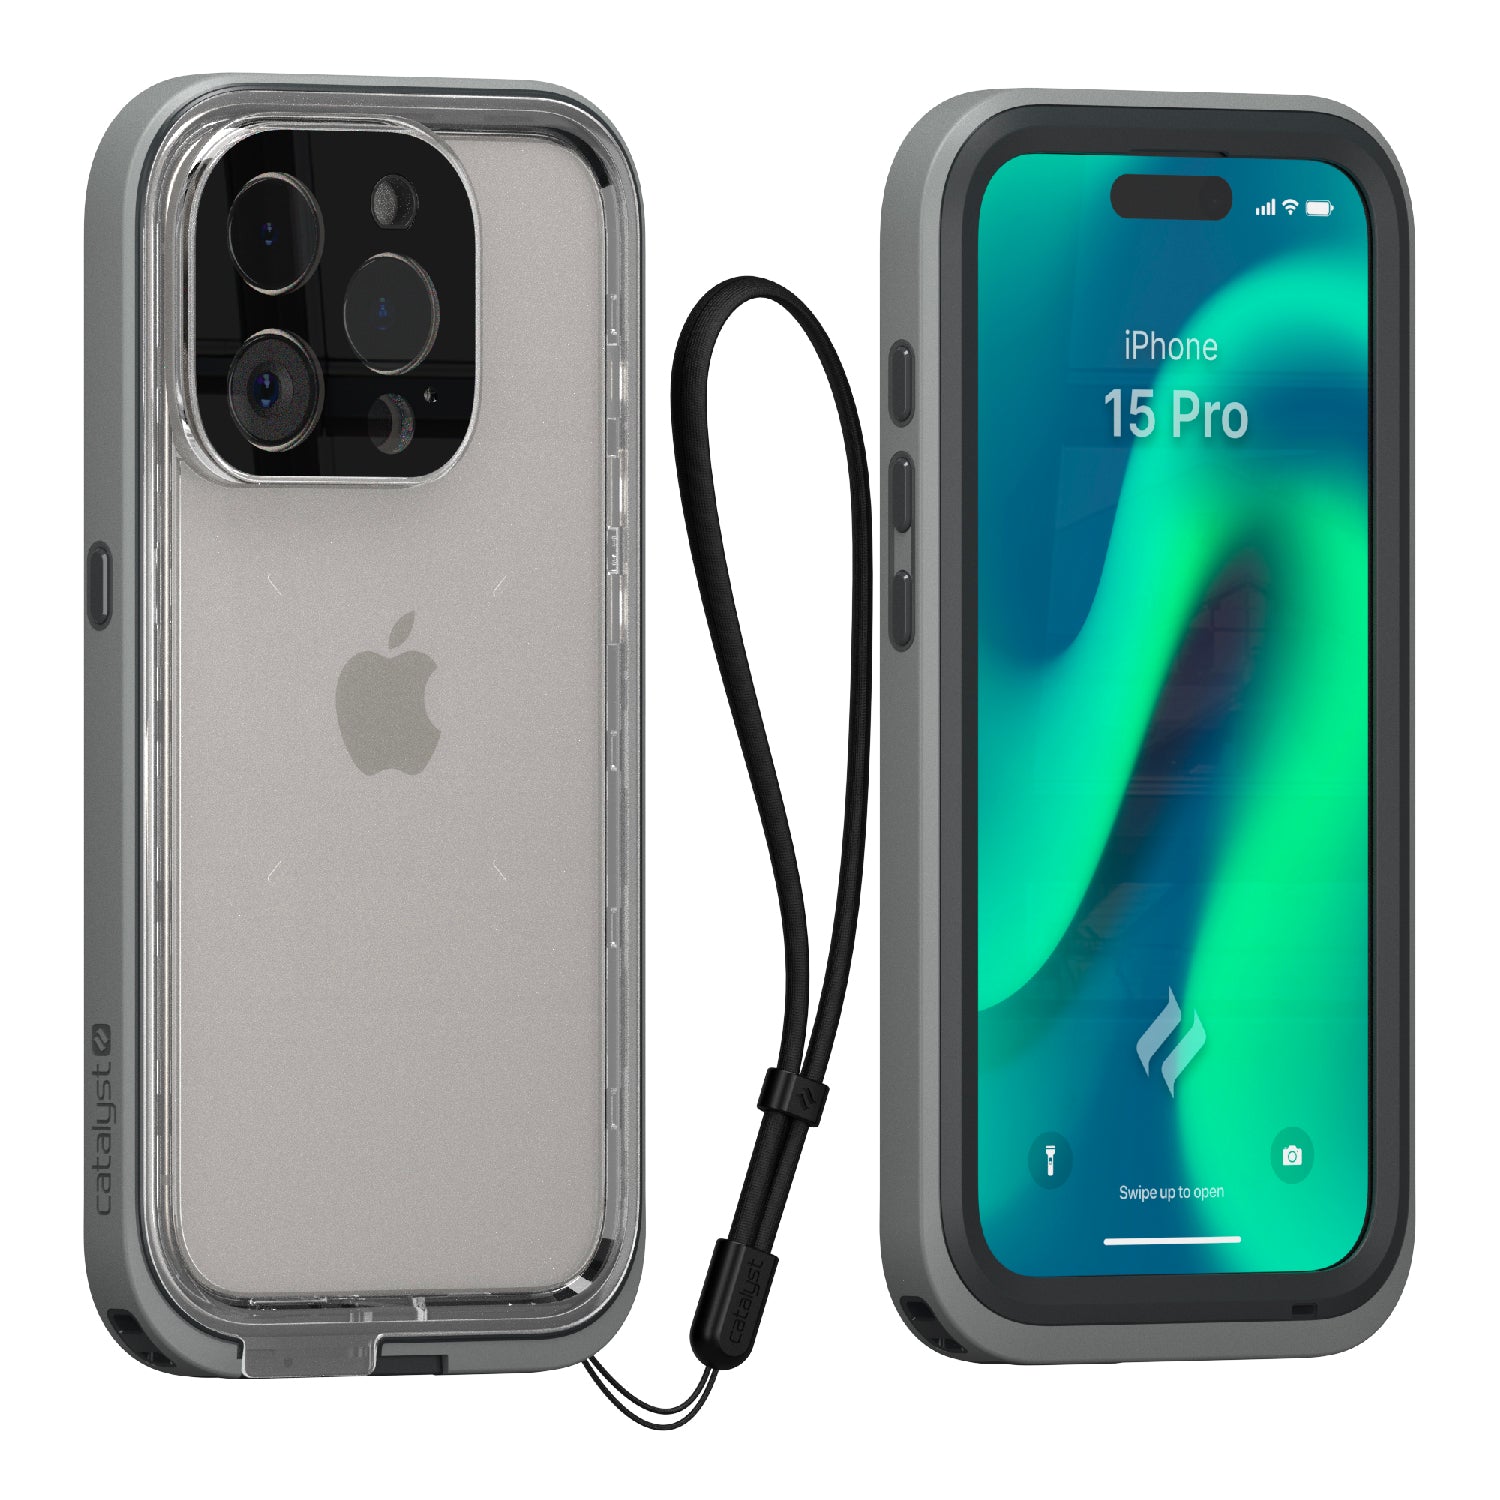 Catalyst iphone 15 pro/15 pro max waterproof case total protection 15 pro showing the front and back view of the case in titanium gray